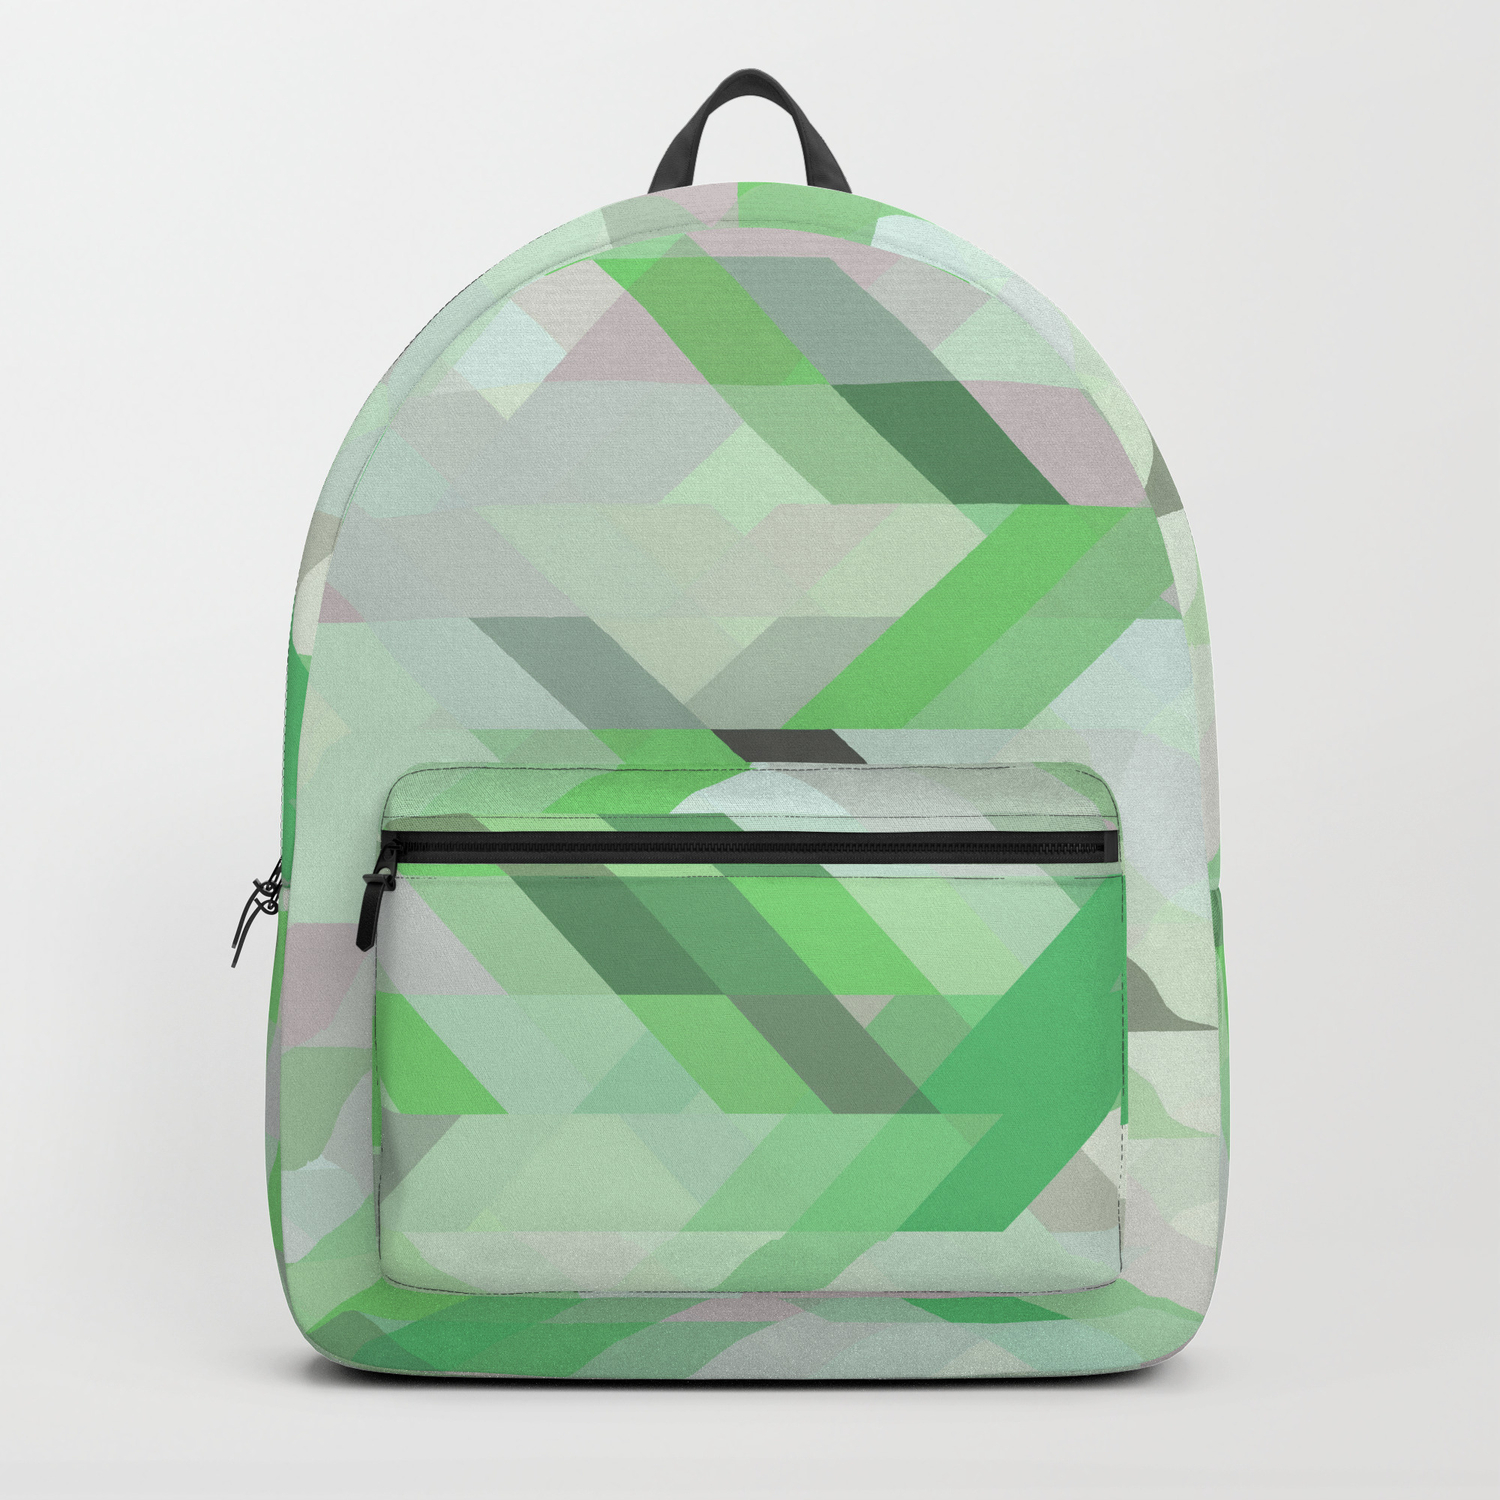 Geometrix Poison Ivy Backpack by ED design for fun | Society6